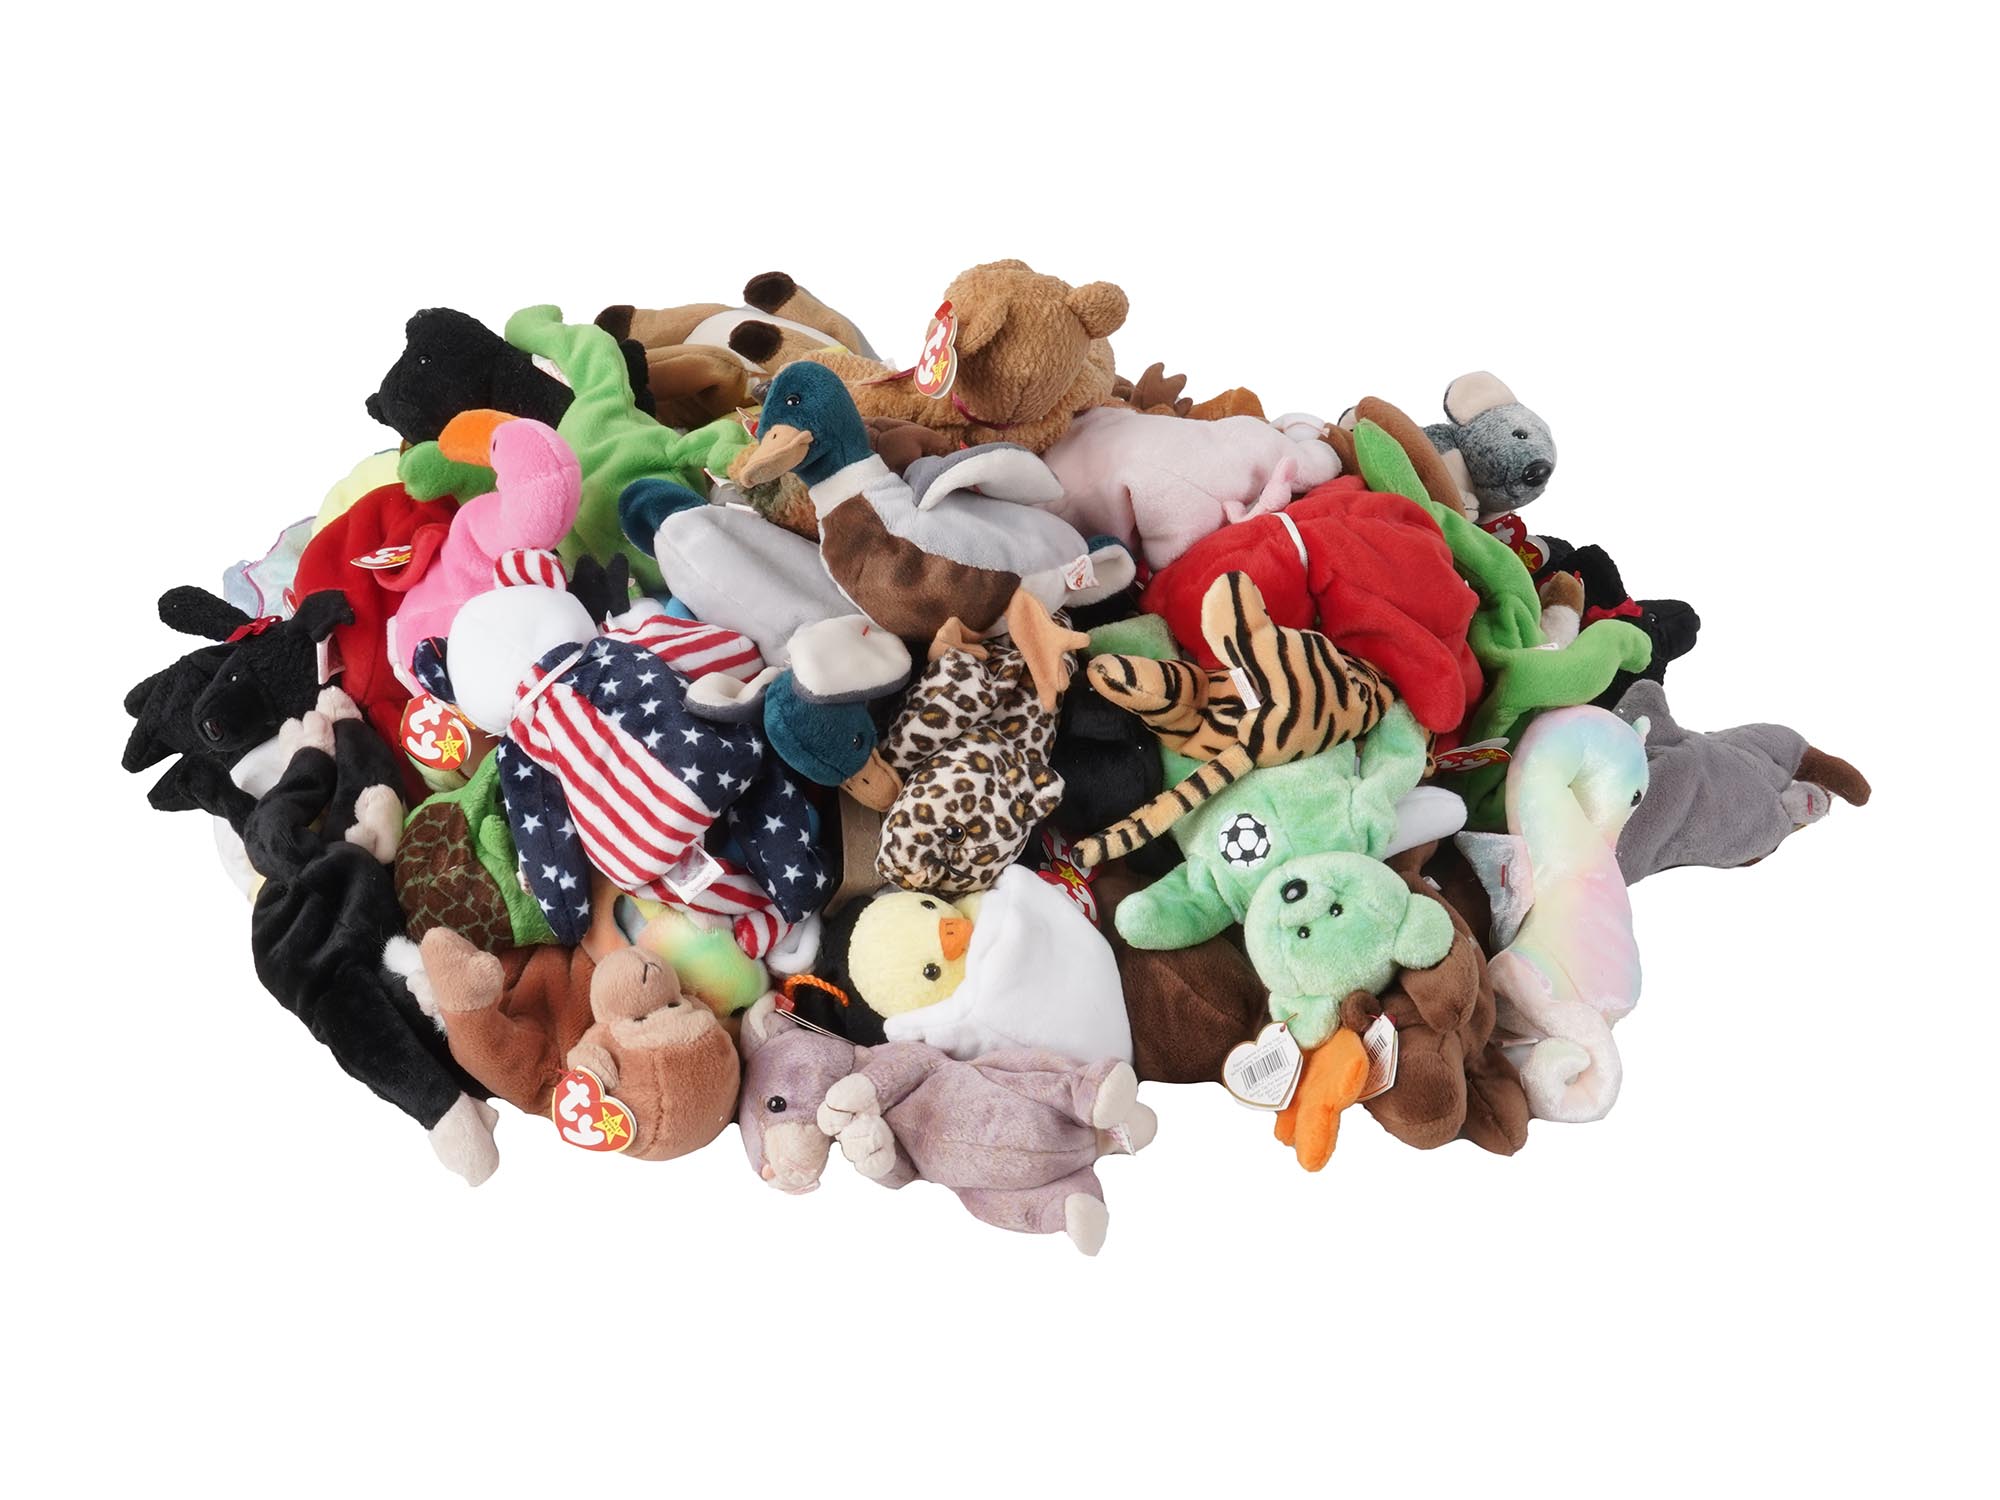 VINTAGE 1990S BEANIE BABY ANIMAL TOYS COLLECTION PIC-0